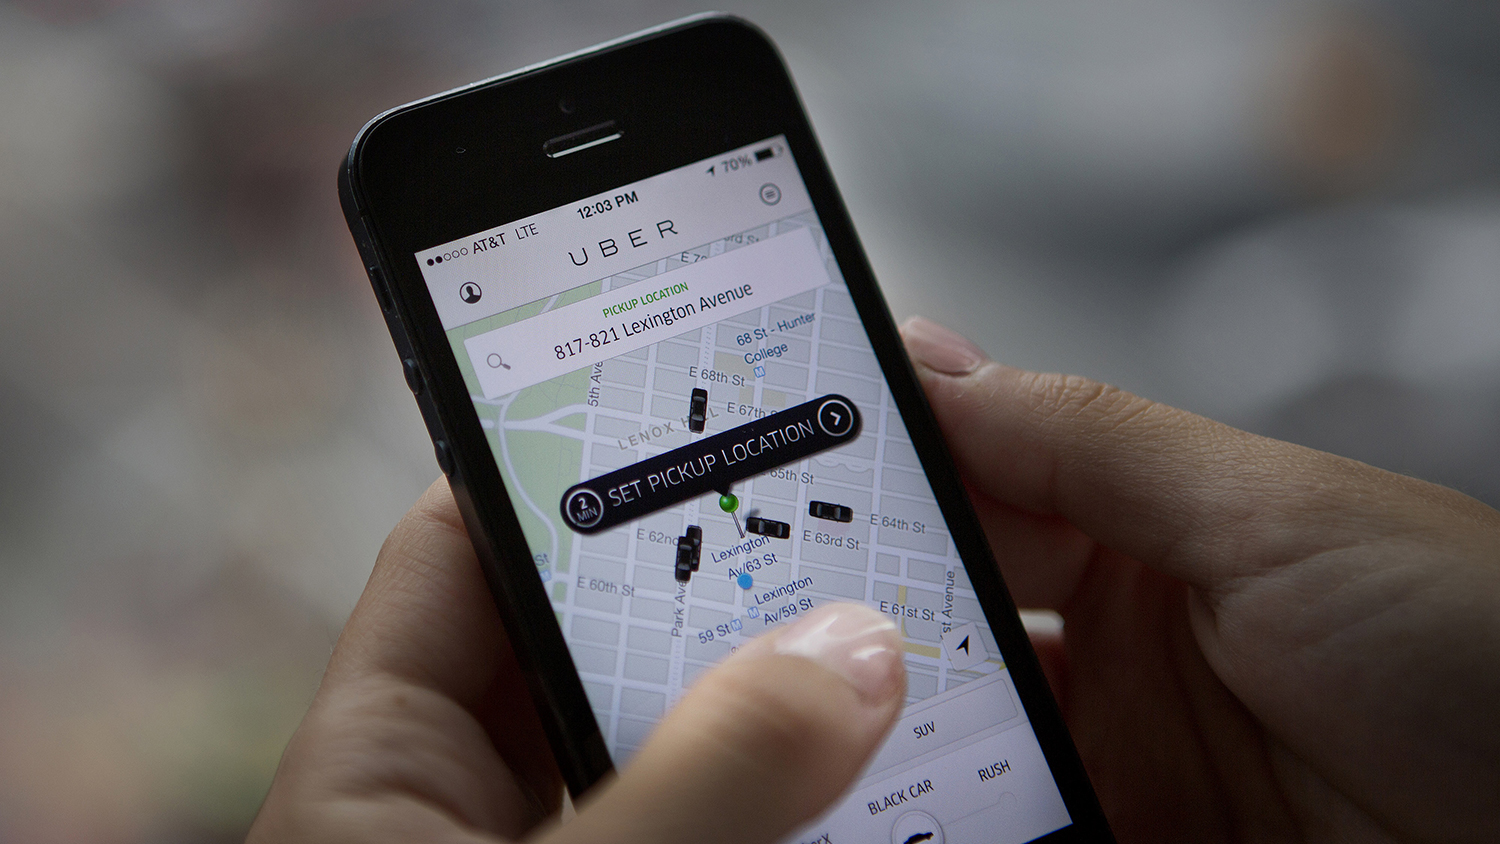 Th Uber Technologies Inc. car service application (app) is demonstrated for a photograph on an Apple Inc. iPhone in New York, U.S., on Wednesday, Aug. 6, 2014.
